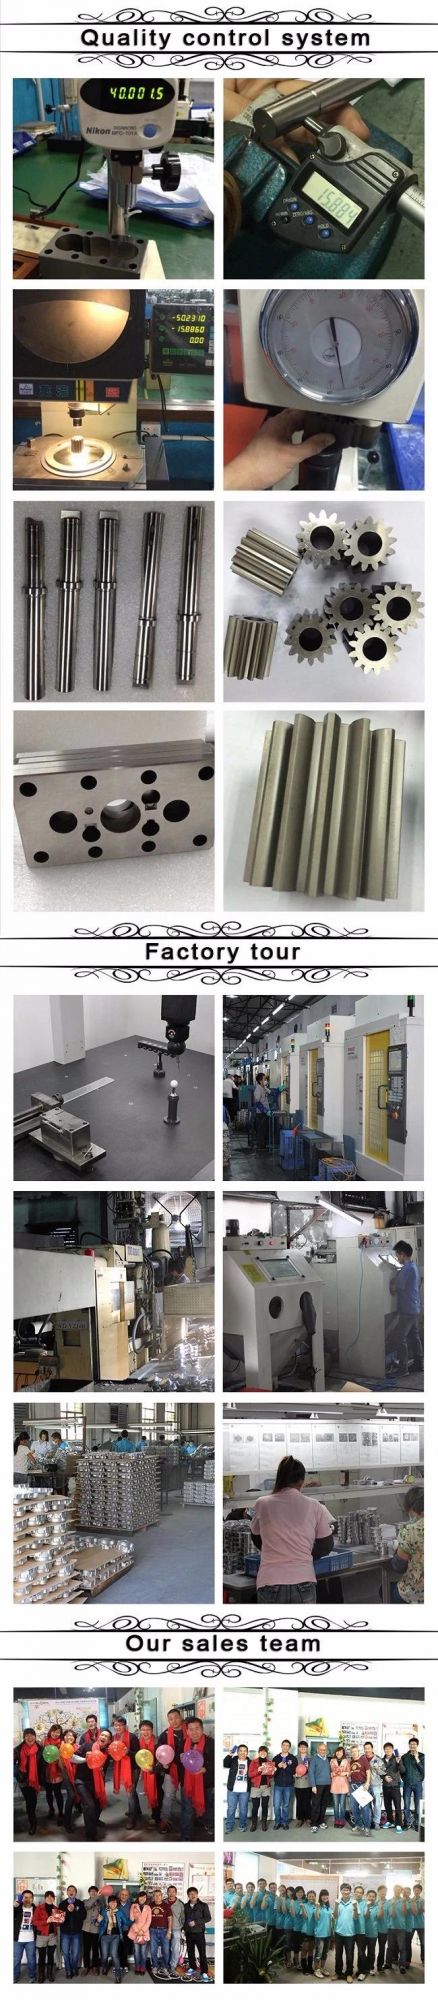 Professional Manufacturer of Brass Gear and Pipe, with Custom CNC Machining Service